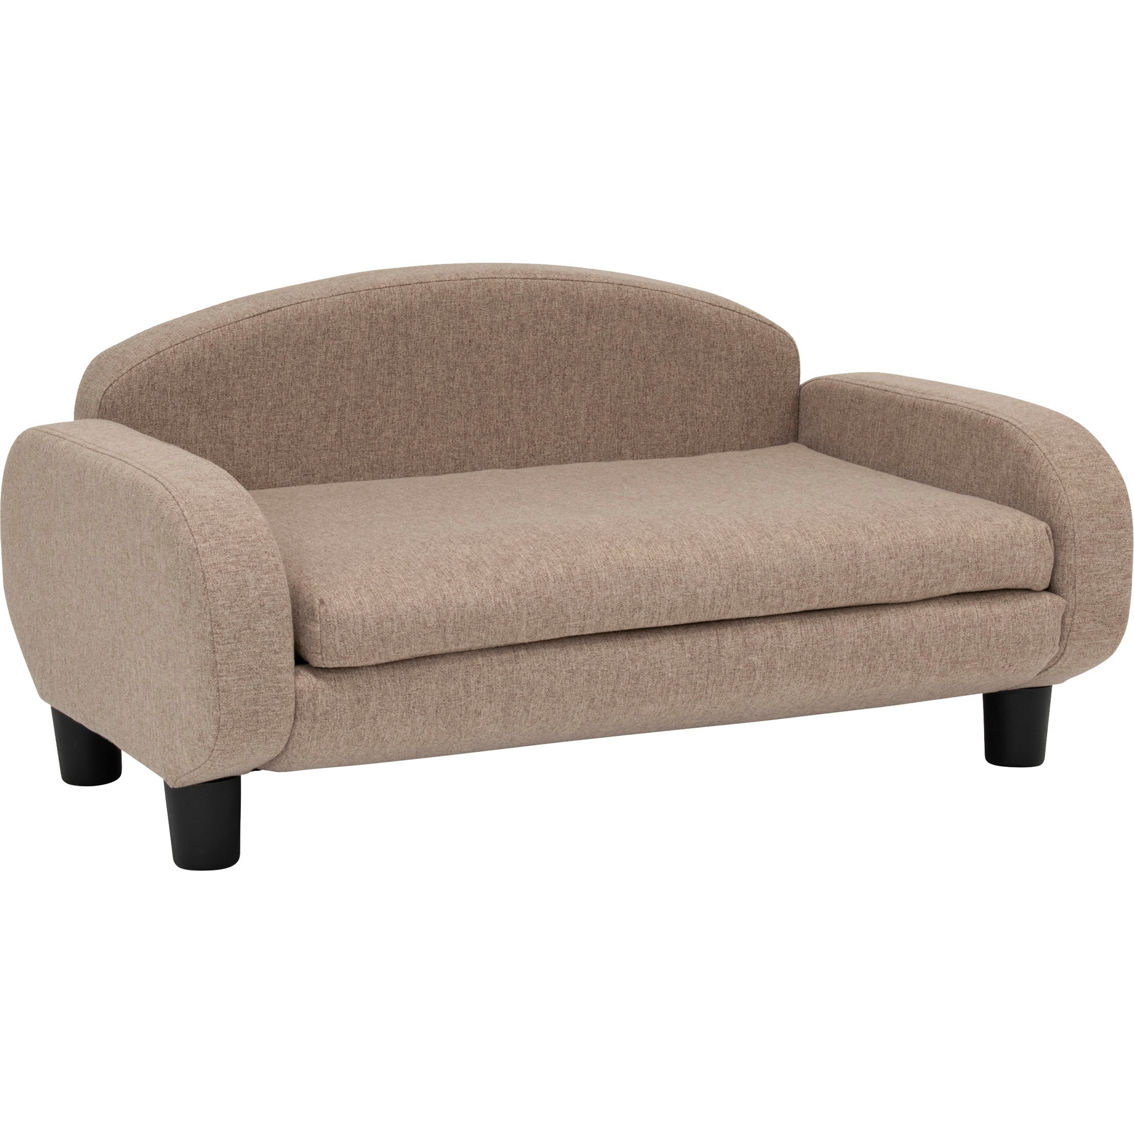 Studio Designs Paws and Purrs Pet Sofa Small - Image 2 of 9